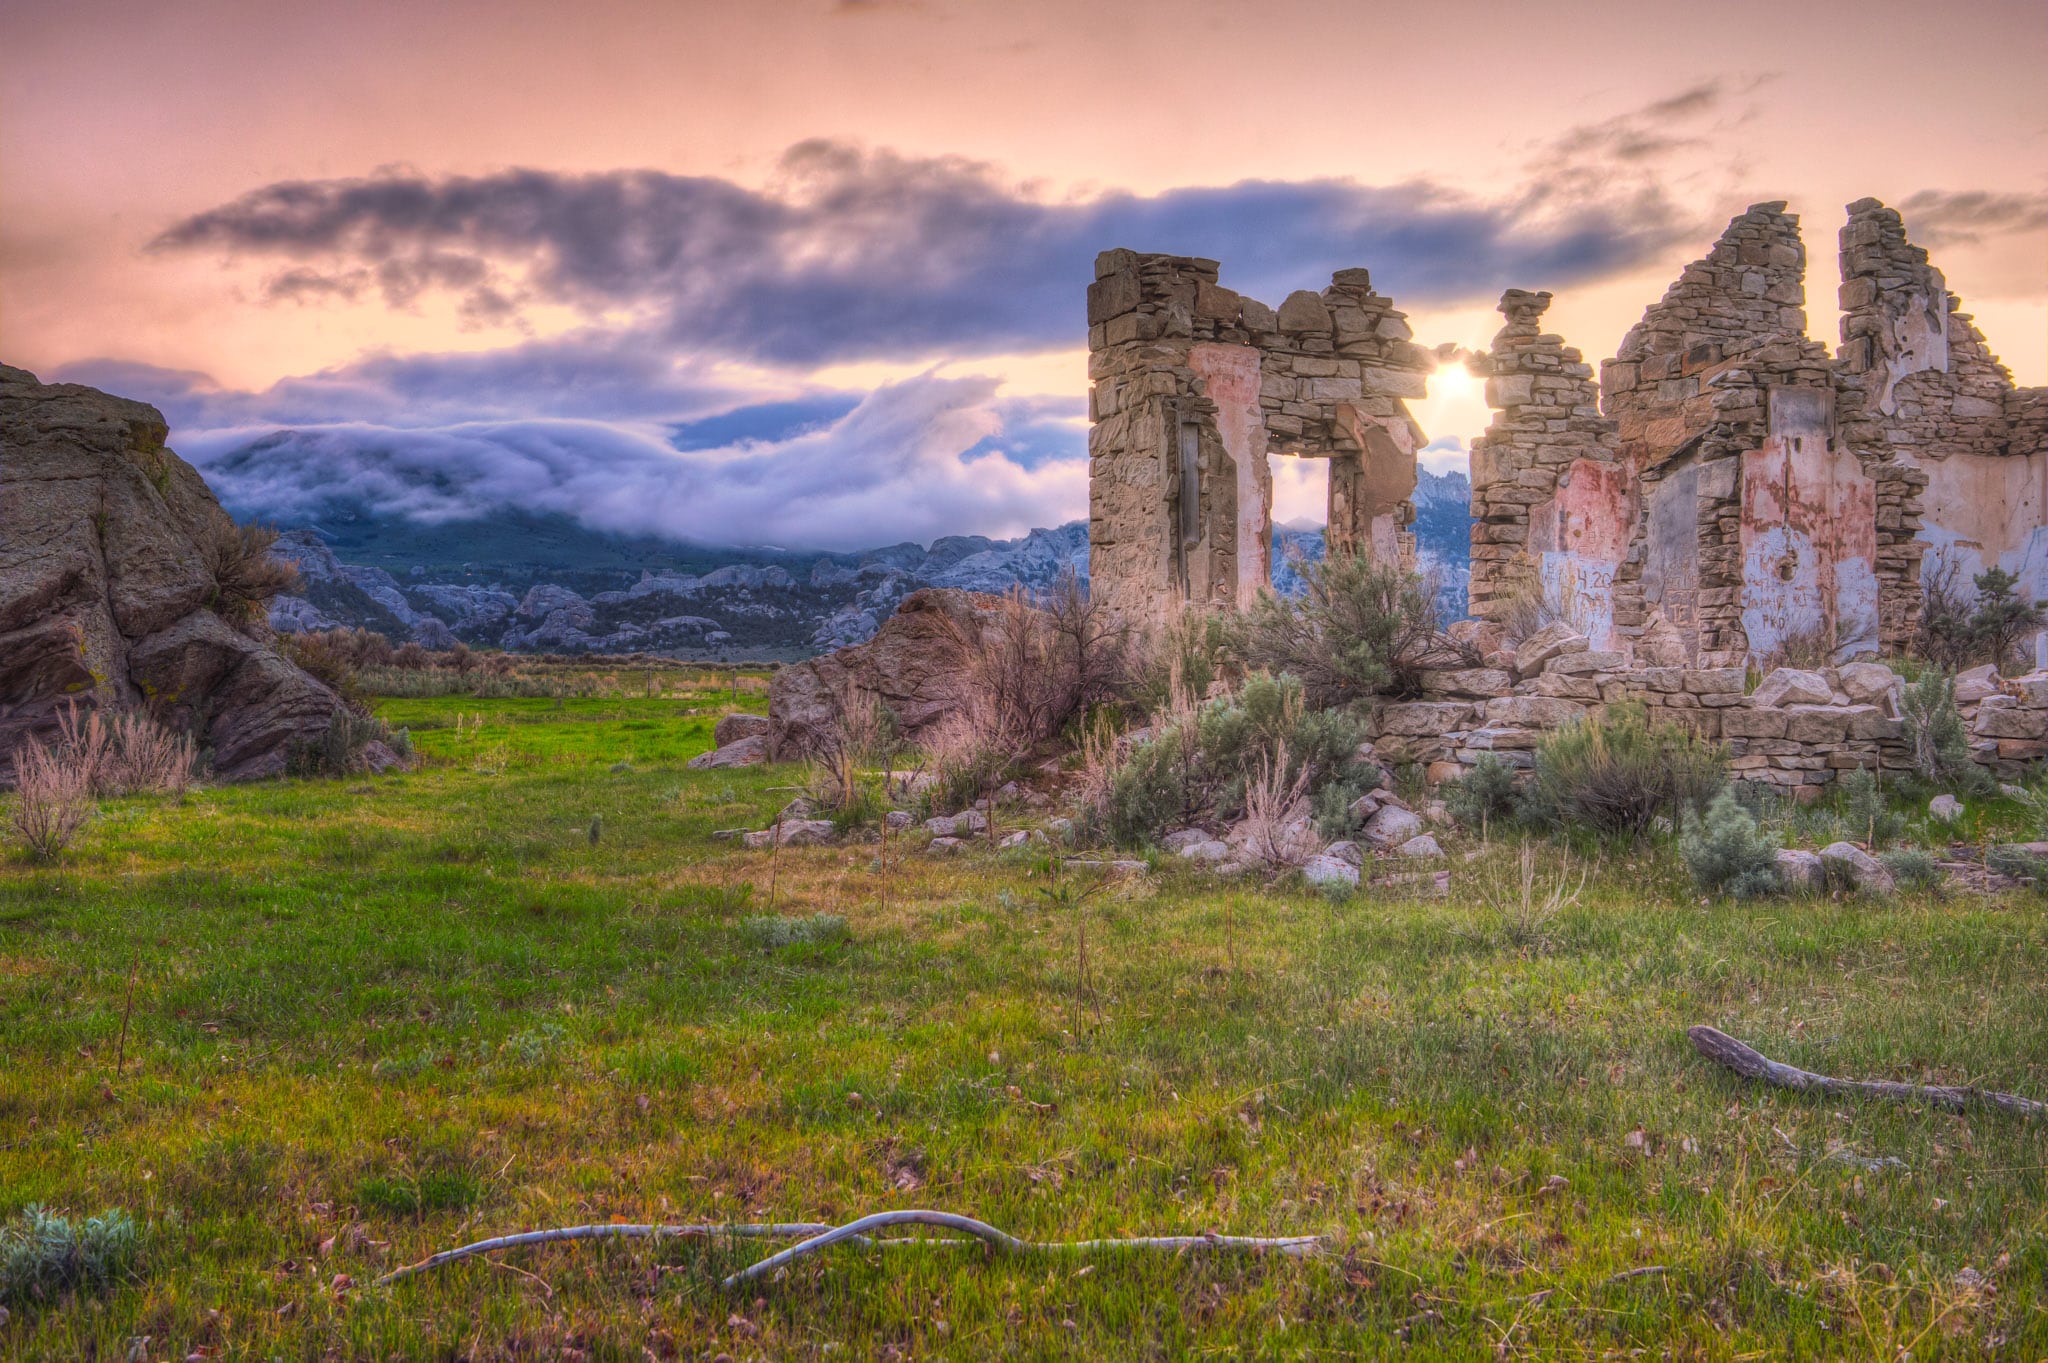 Clouds roll down the Albion Mountains at sunet with stone ruins in the foreground in City of Rocks National Reserve in Idaho.